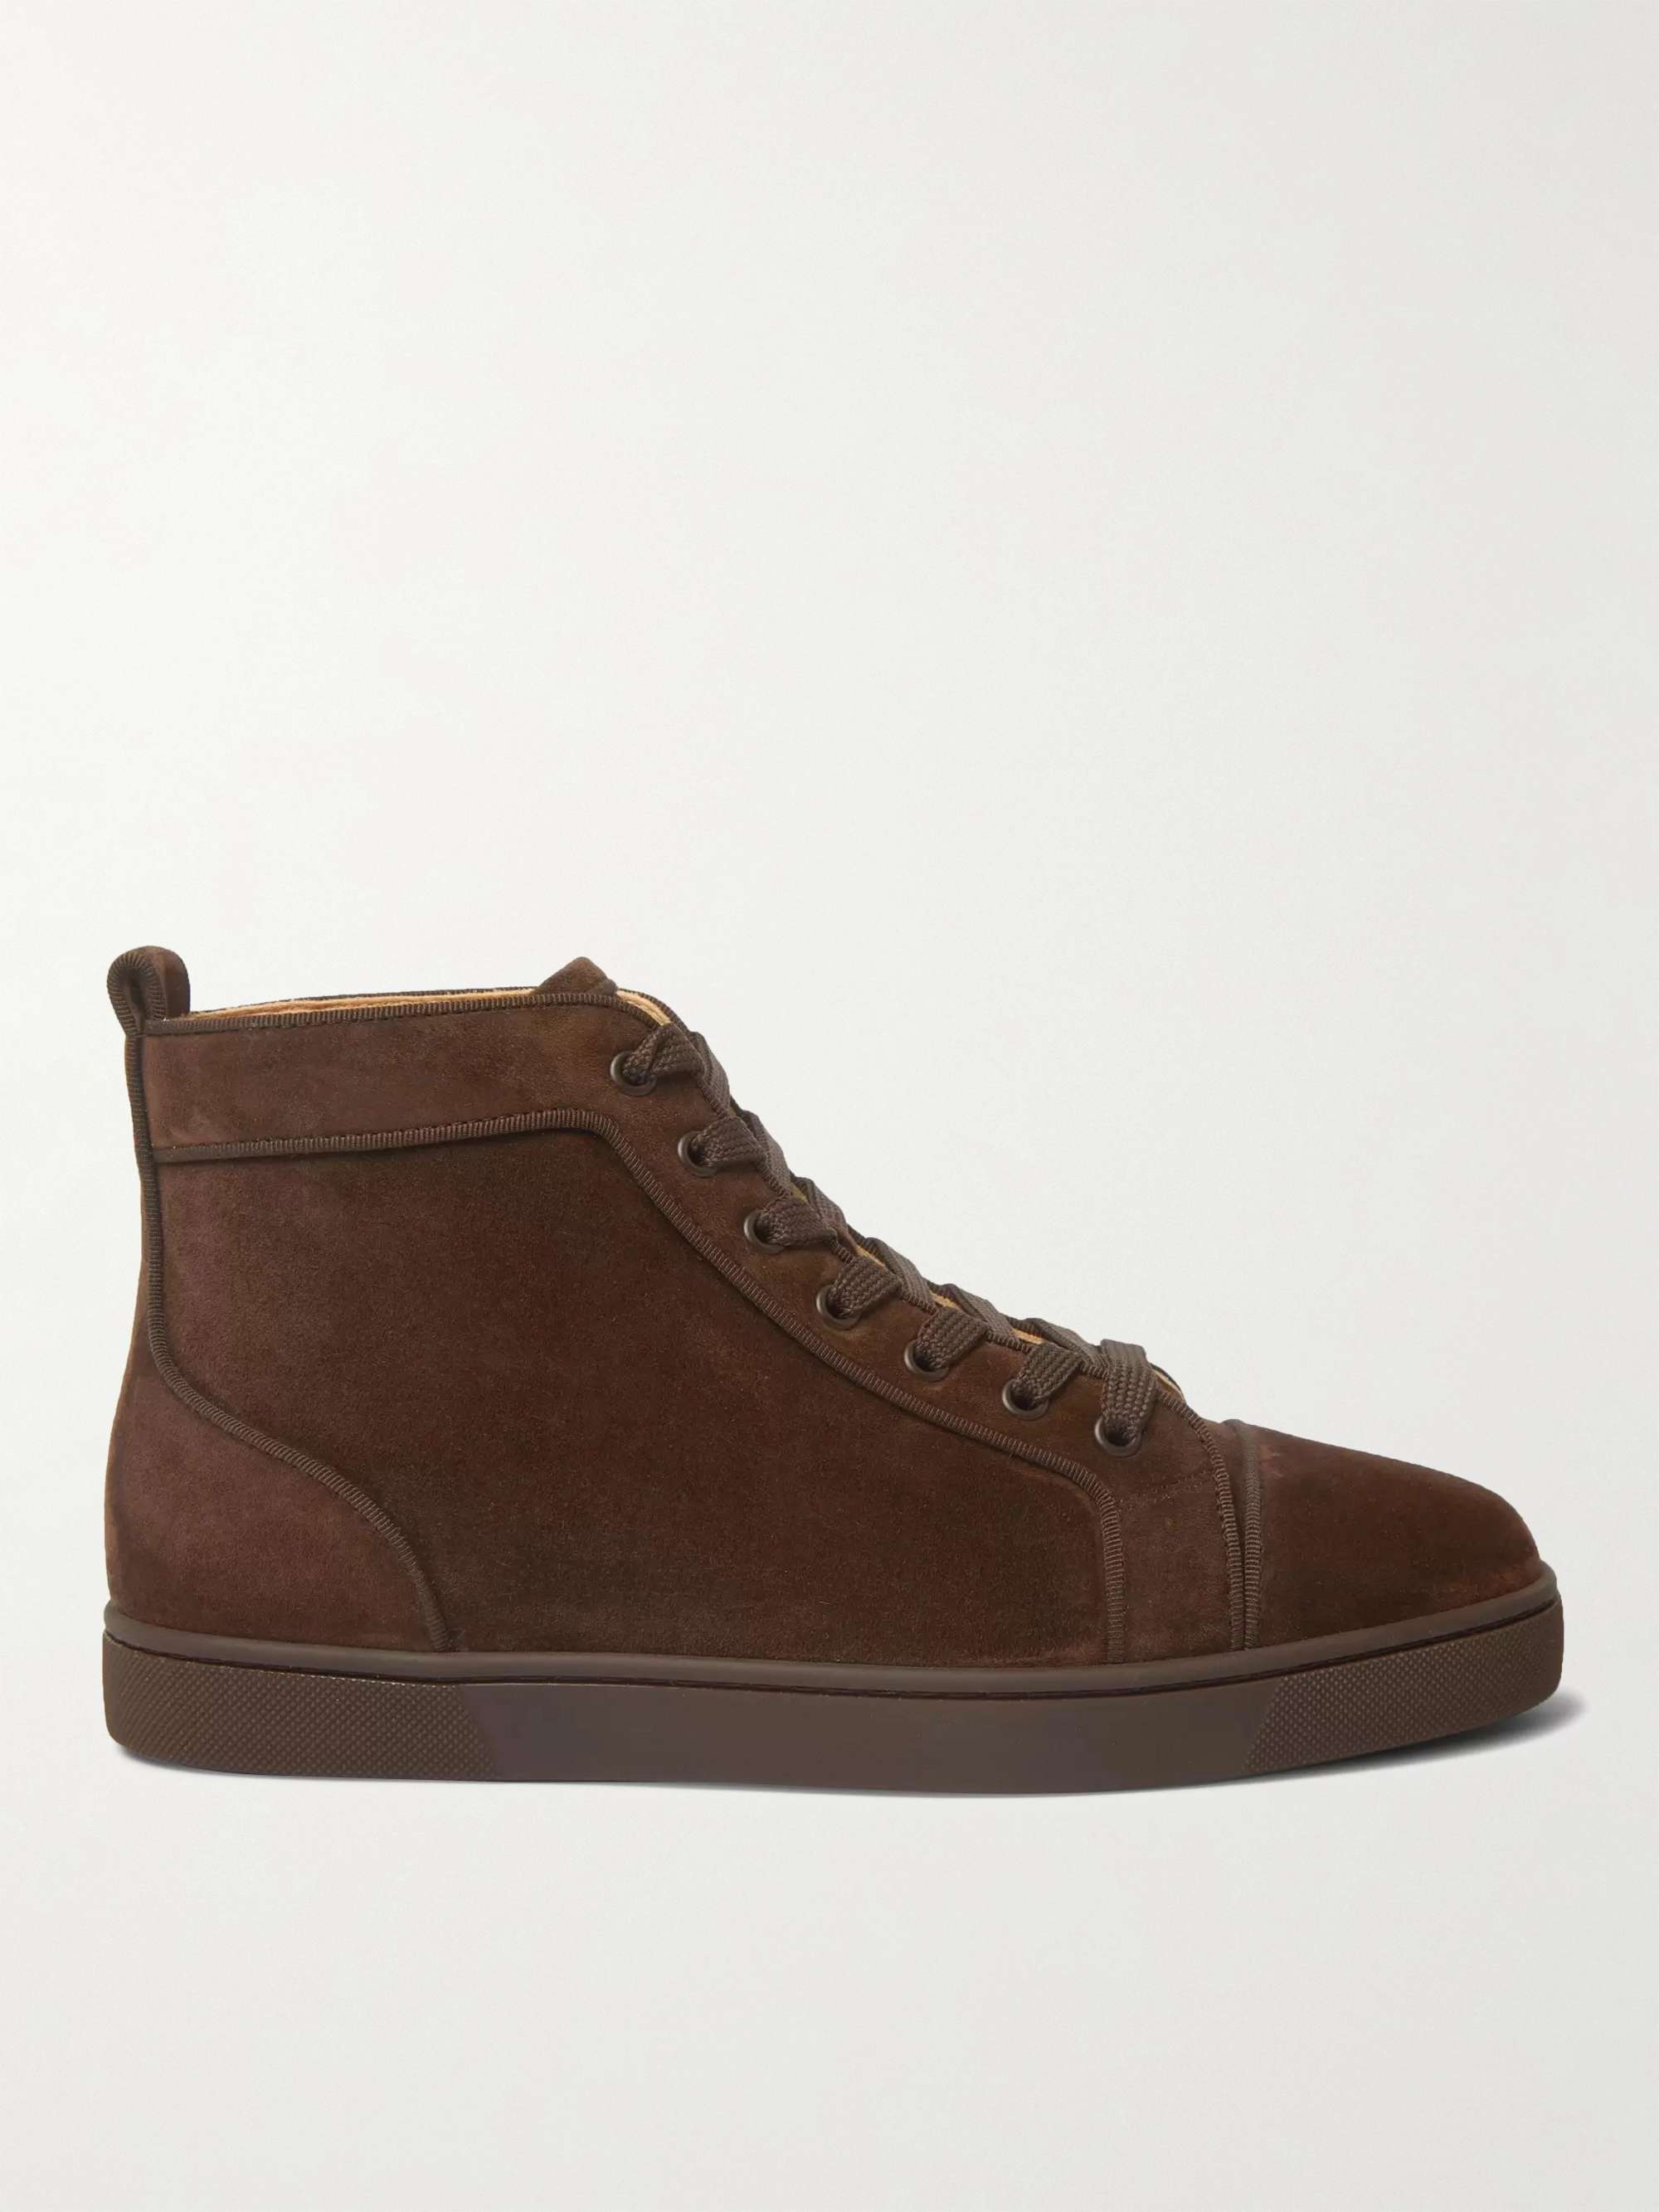 CHRISTIAN LOUBOUTIN Louis Suede High-Top Sneakers for Men | MR PORTER